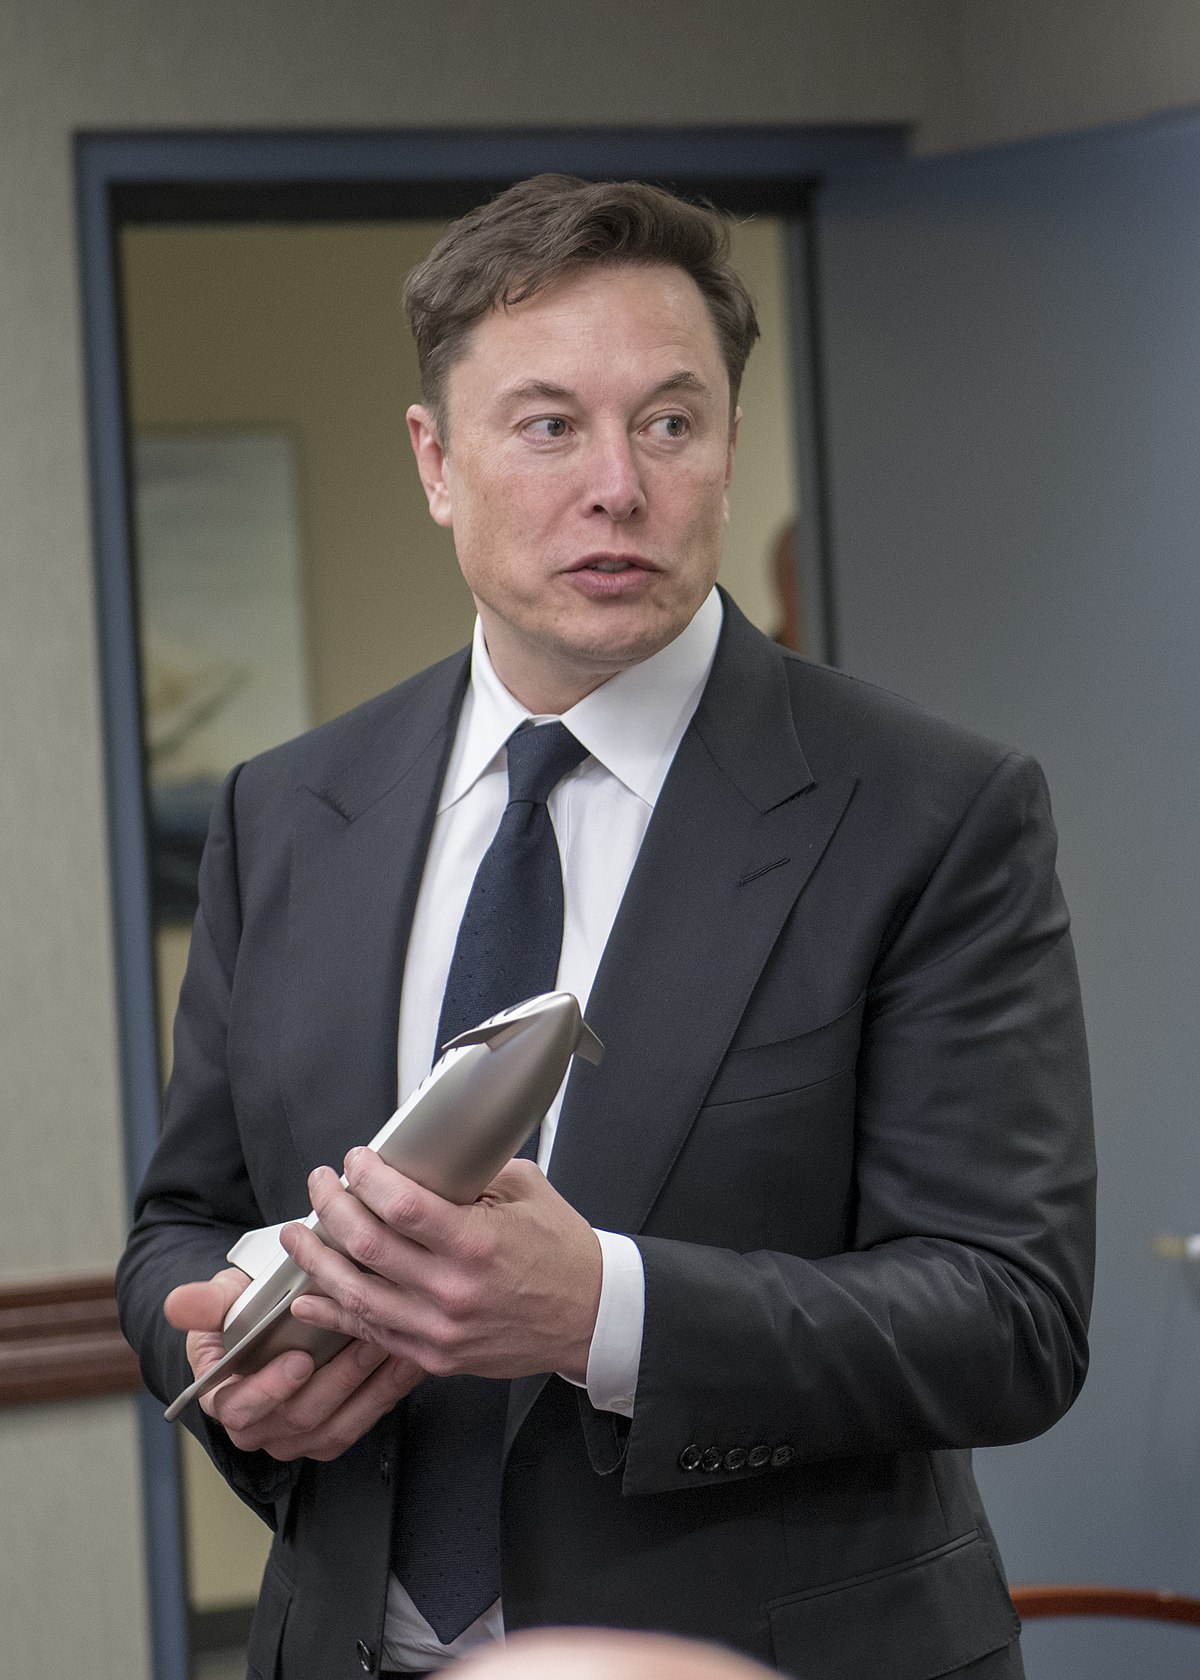 SpaceX CEO Elon Musk visits N&NC and AFSPC (190416-F-ZZ999-006).jpg